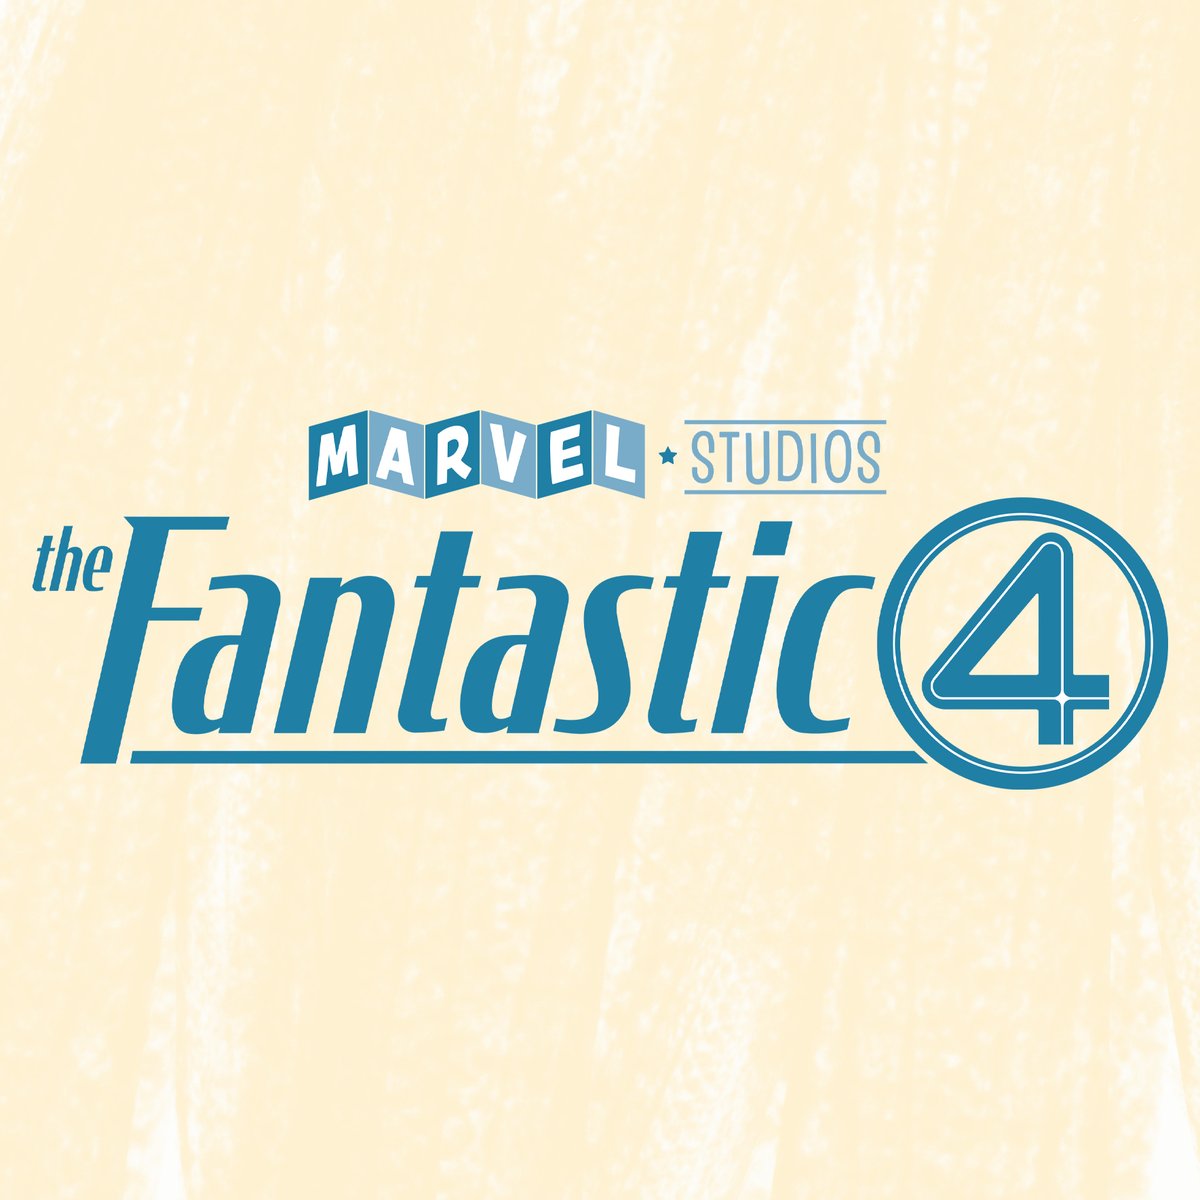 Marvel Studios' The Fantastic Four arrives in theaters July 25, 2025.